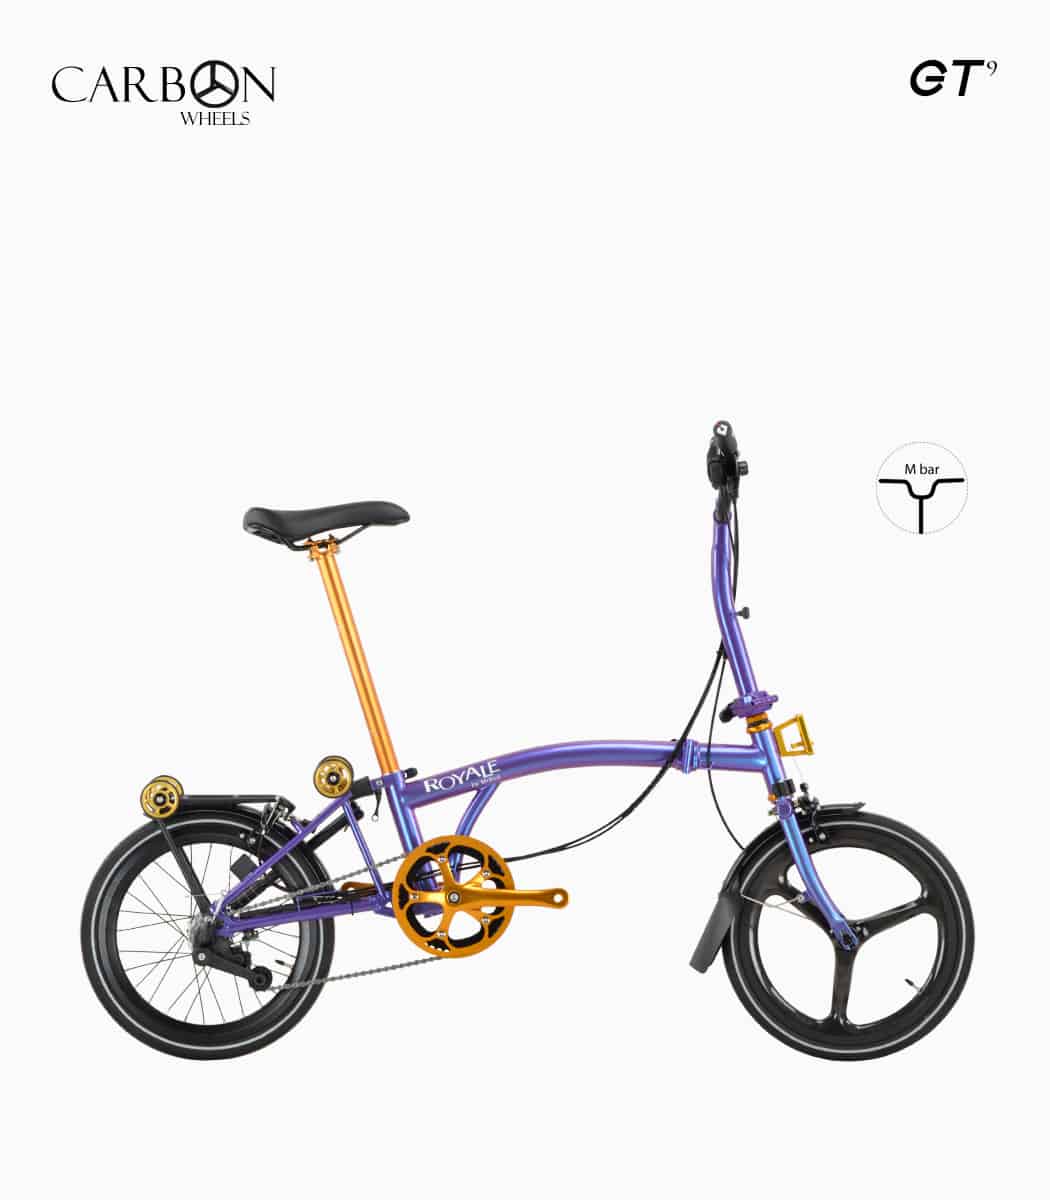 ROYALE CARBON GT M9 (METALLIC PURPLE) foldable bicycle M bar with gold components right